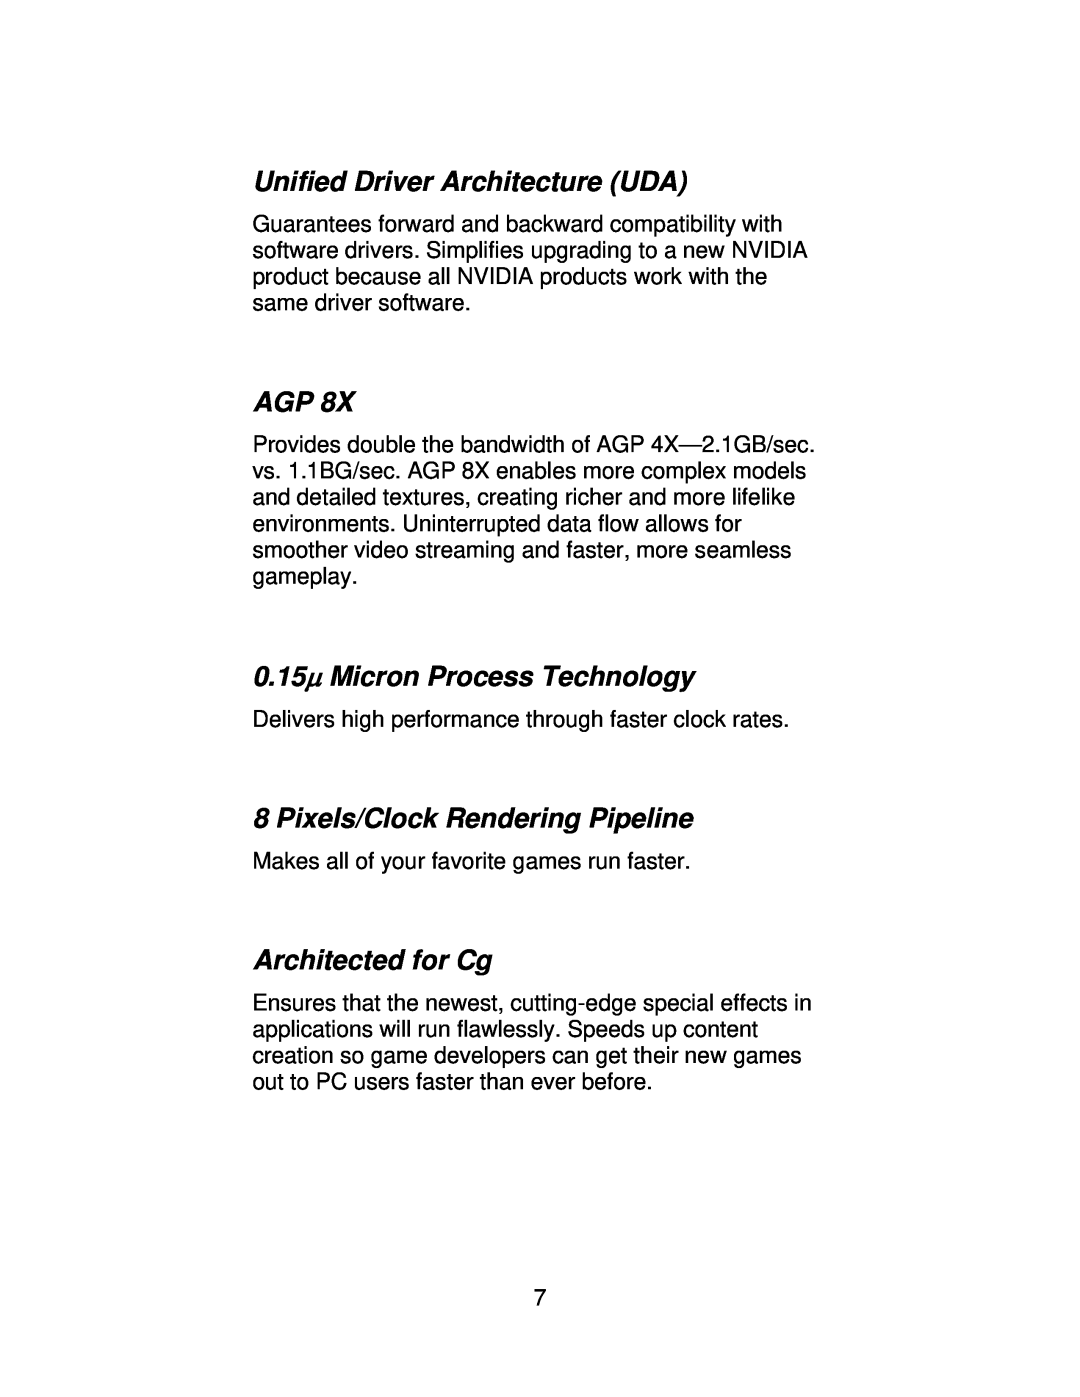 Jaton 5200 user manual Unified Driver Architecture UDA, 0.15μ Micron Process Technology, Pixels/Clock Rendering Pipeline 